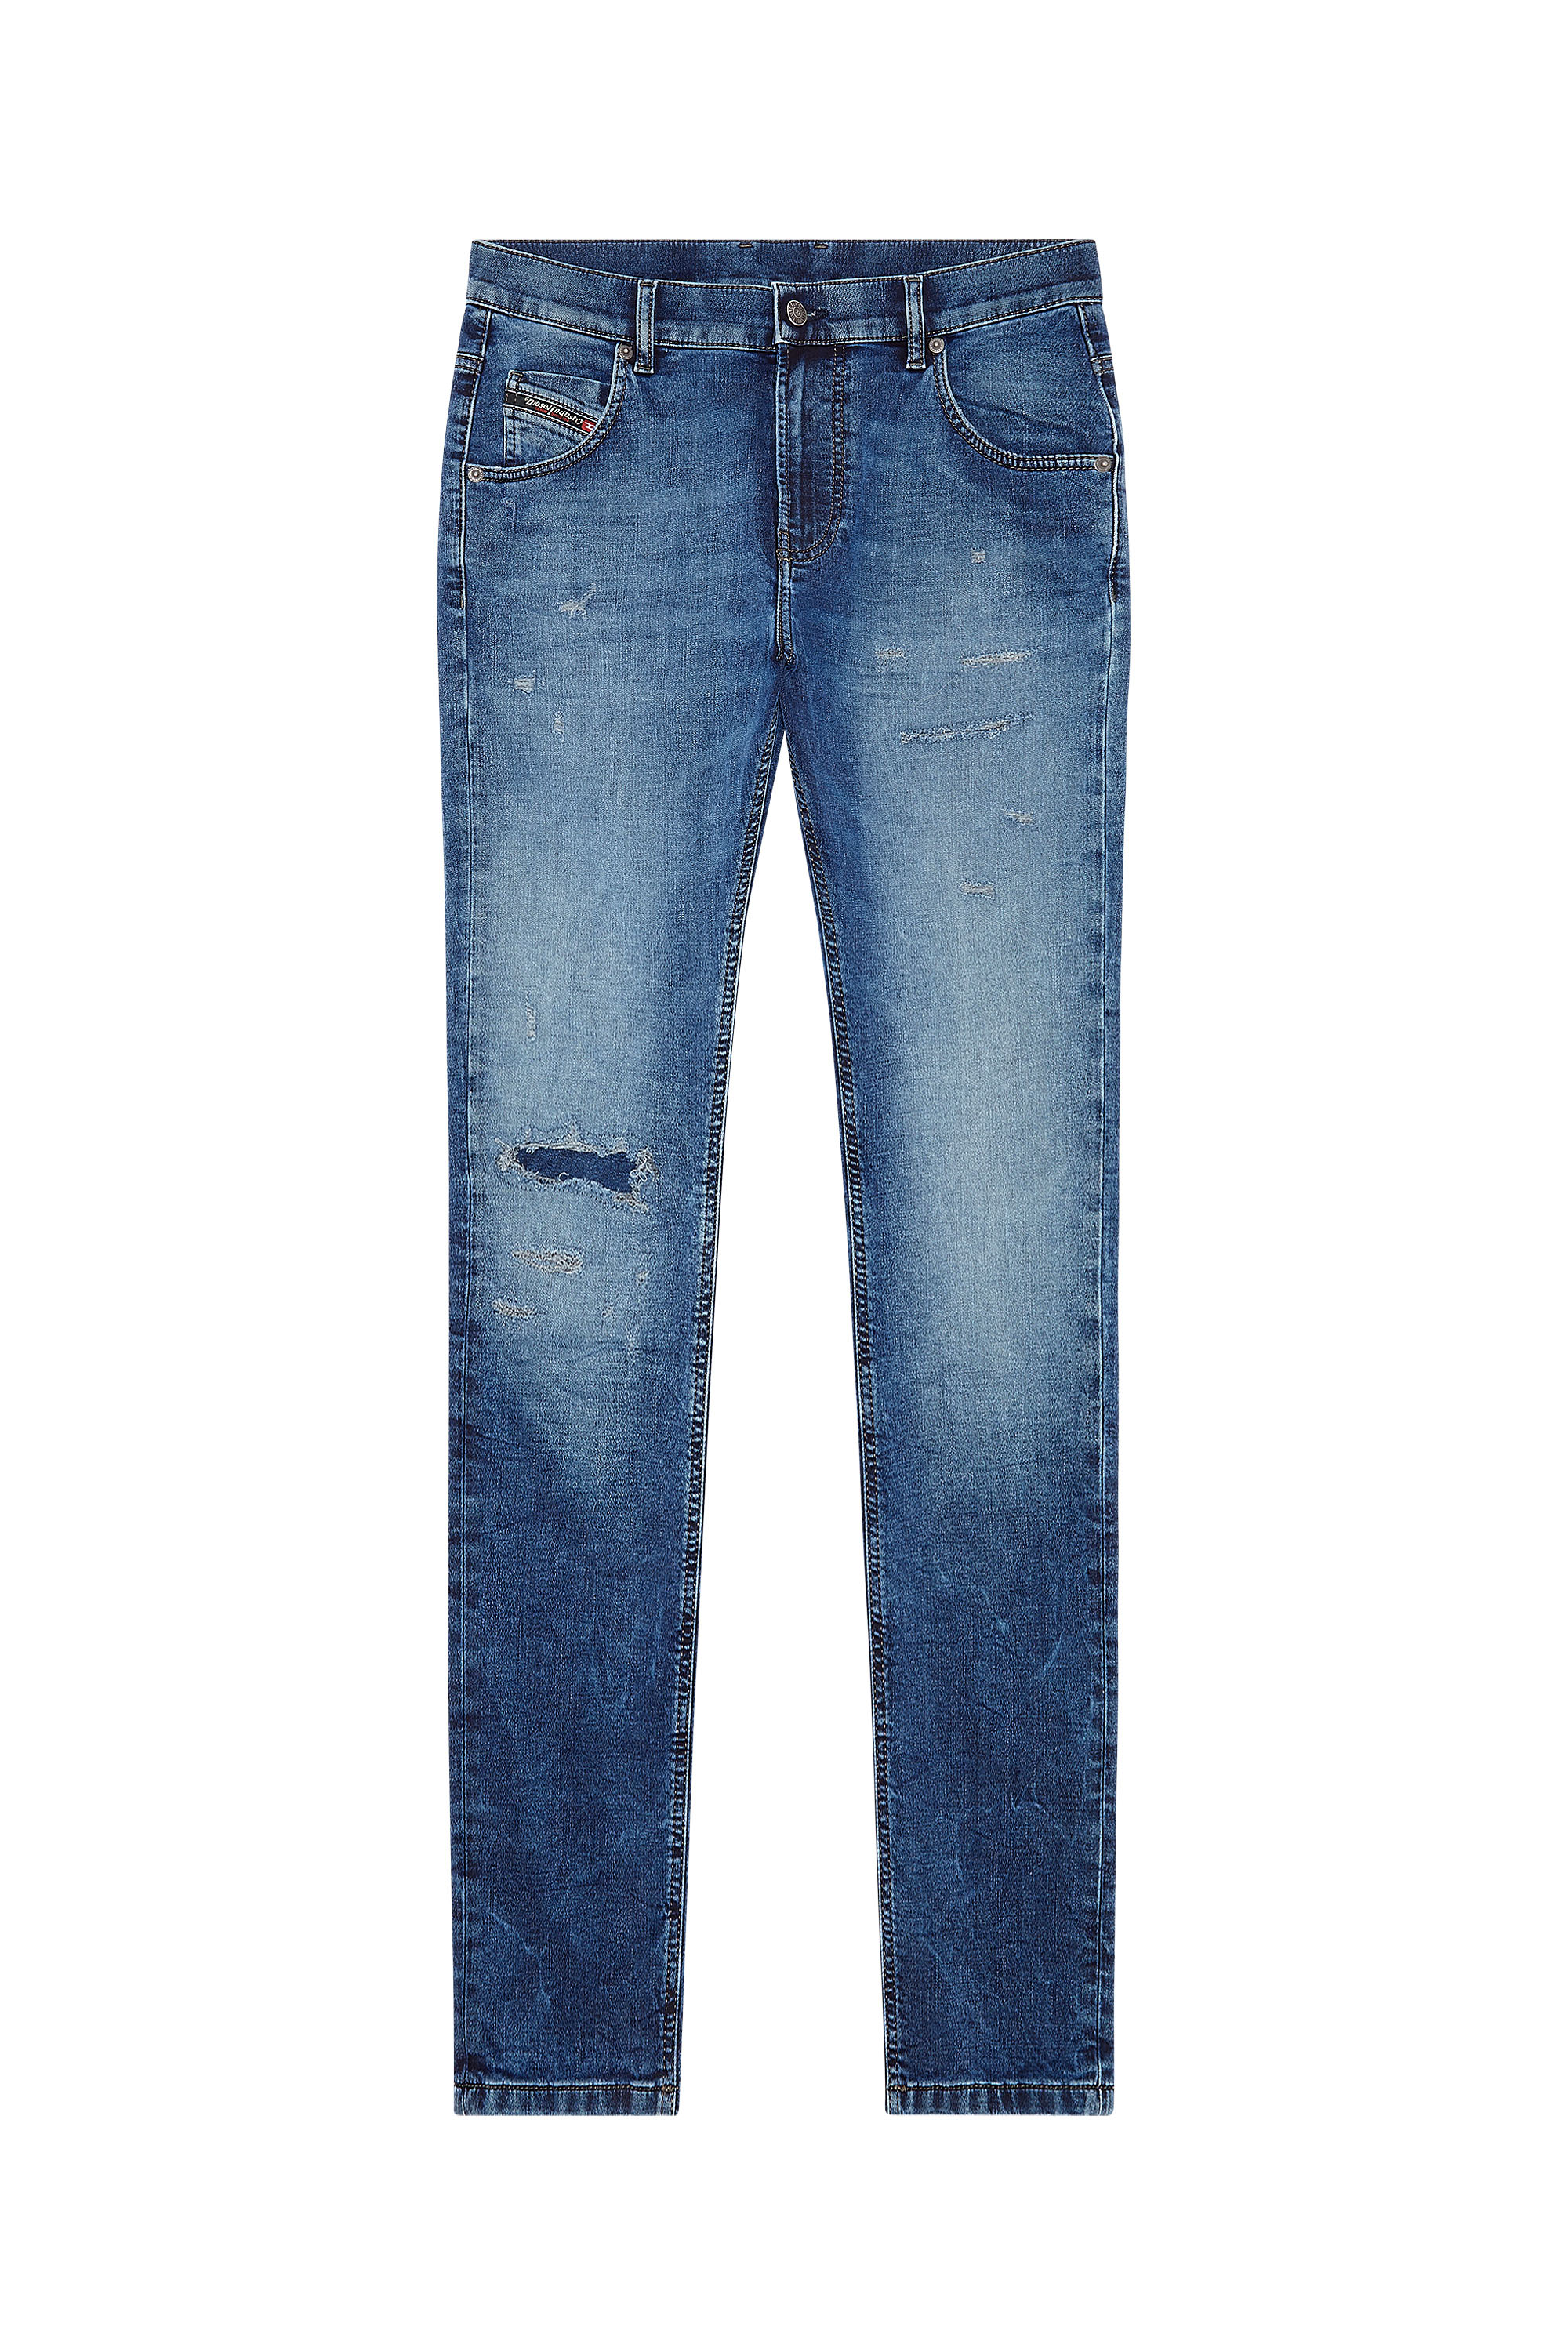 Women's JoggJeans: High-waisted, baggy, stretch jeans | Diesel®